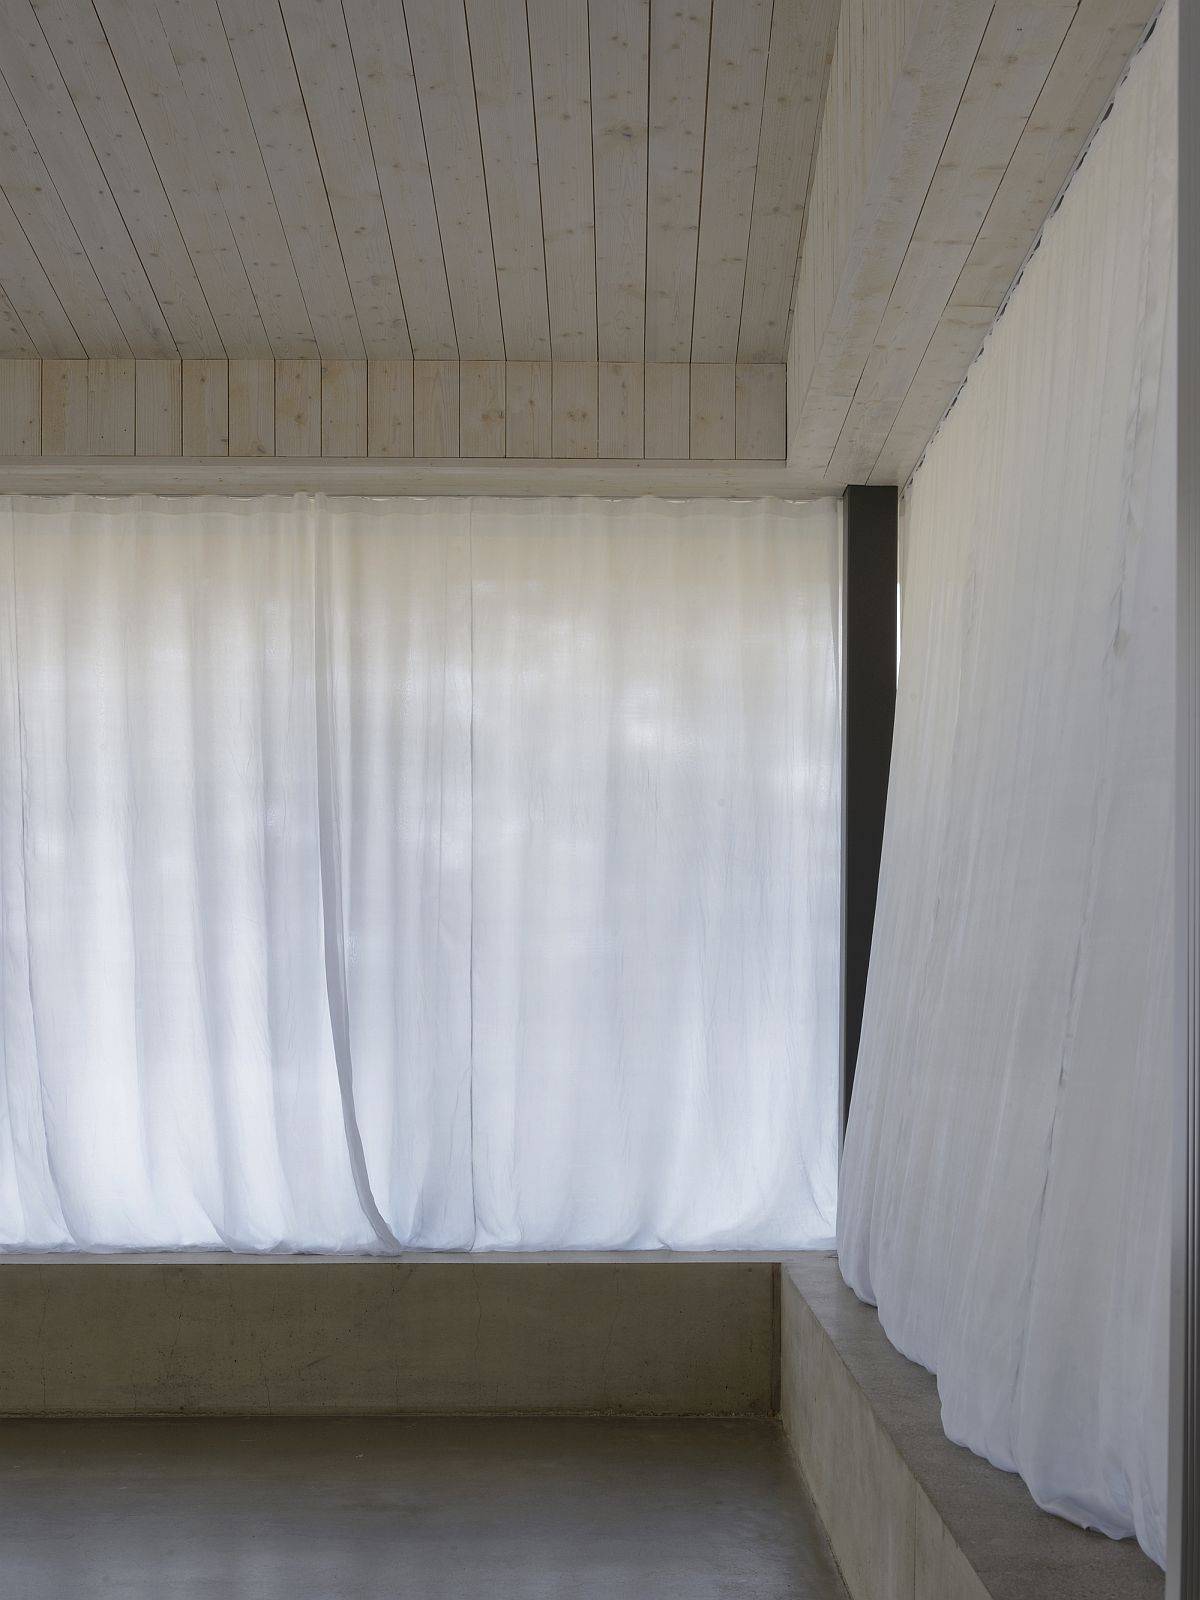 White sheer curtains block out the light from outside on sunny days